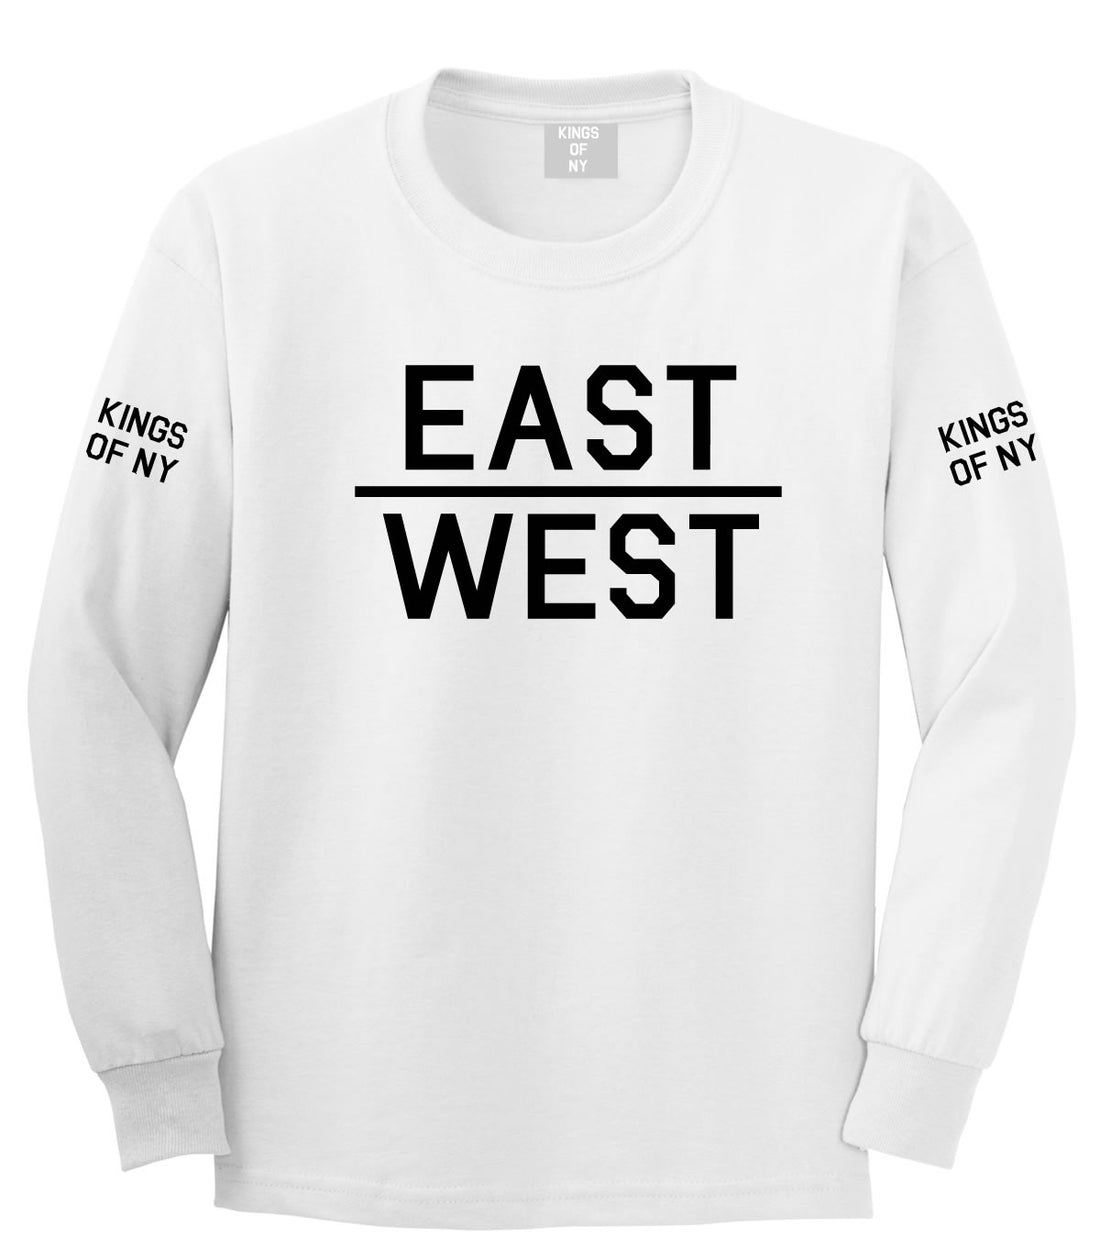 East West Long Sleeve T-Shirt in White by Kings Of NY